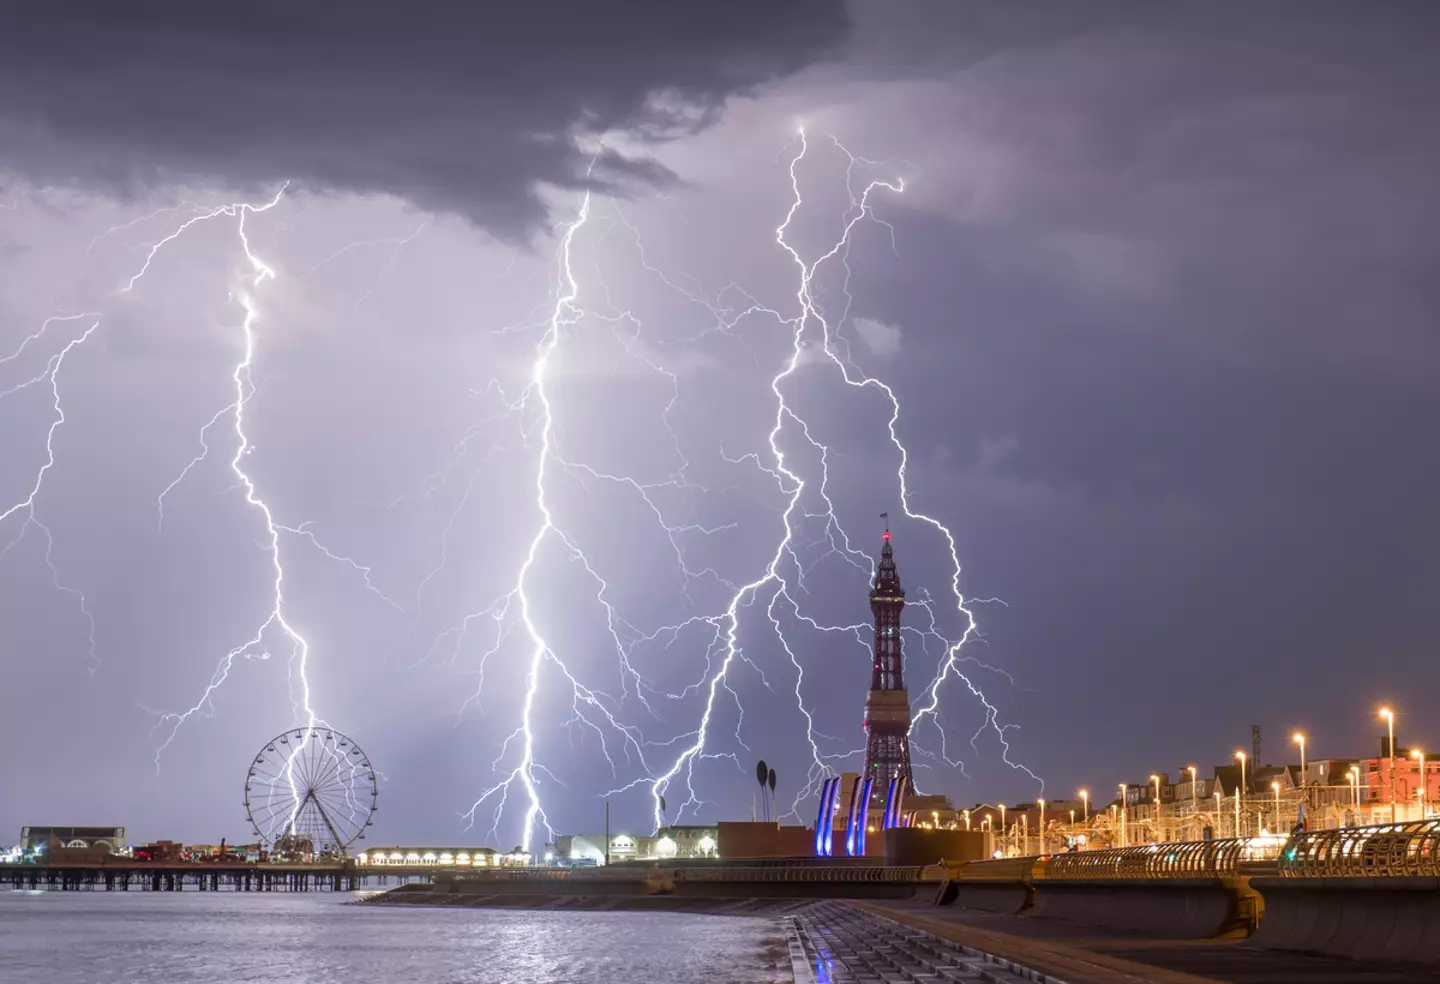 Areas of the UK are set to be hit by thunderstorms.